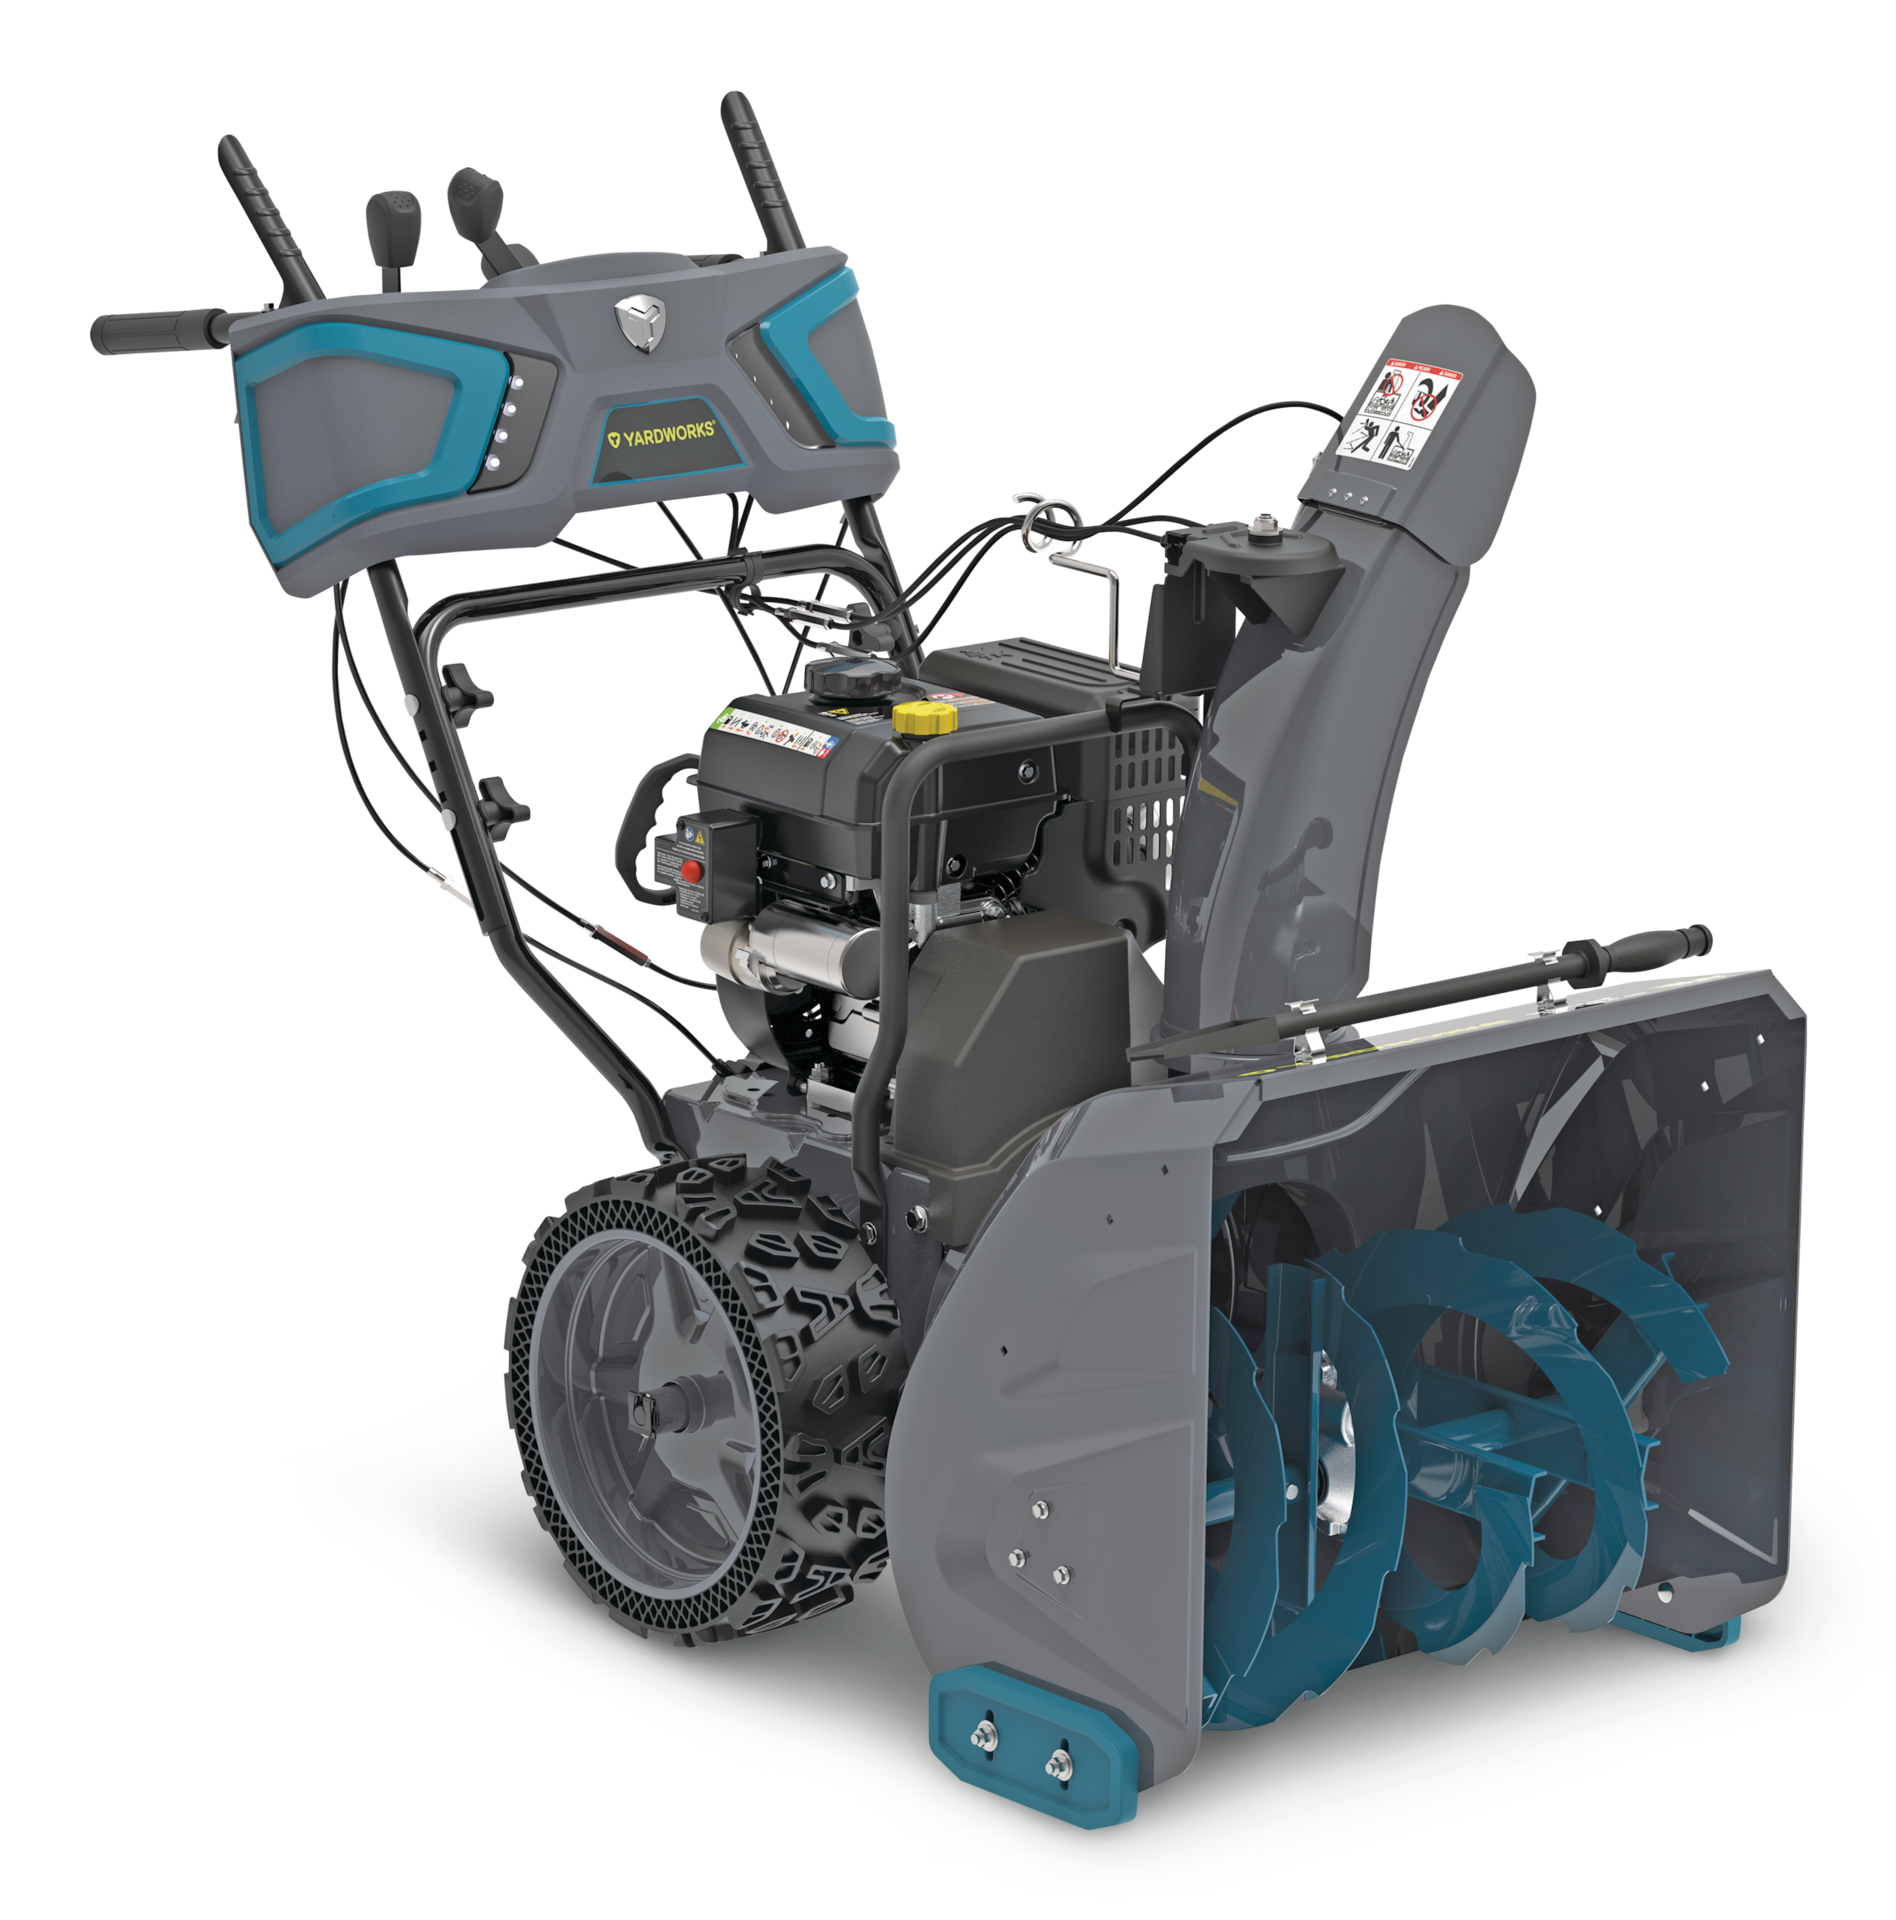 Yardworks 224cc 2Stage Gas Snowblower with Electric Start, 24in